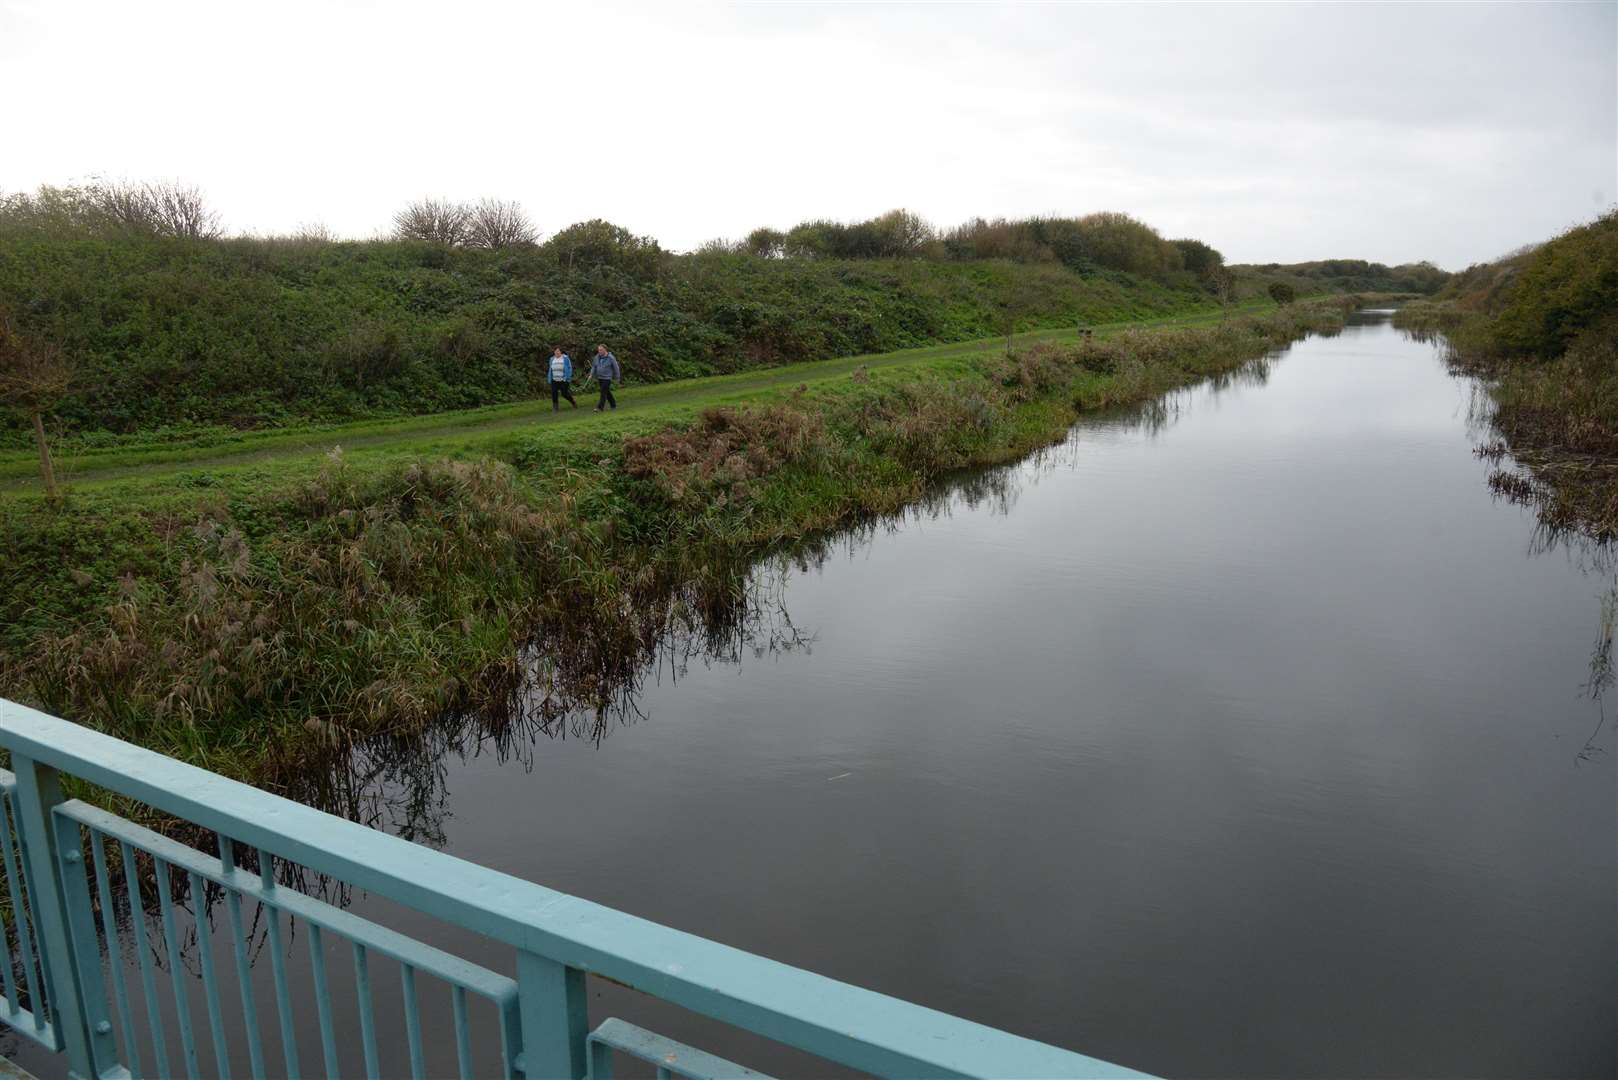 Land between the Royal Military Canal and the seafront, the site of proposed development. Picture: Chris Davey